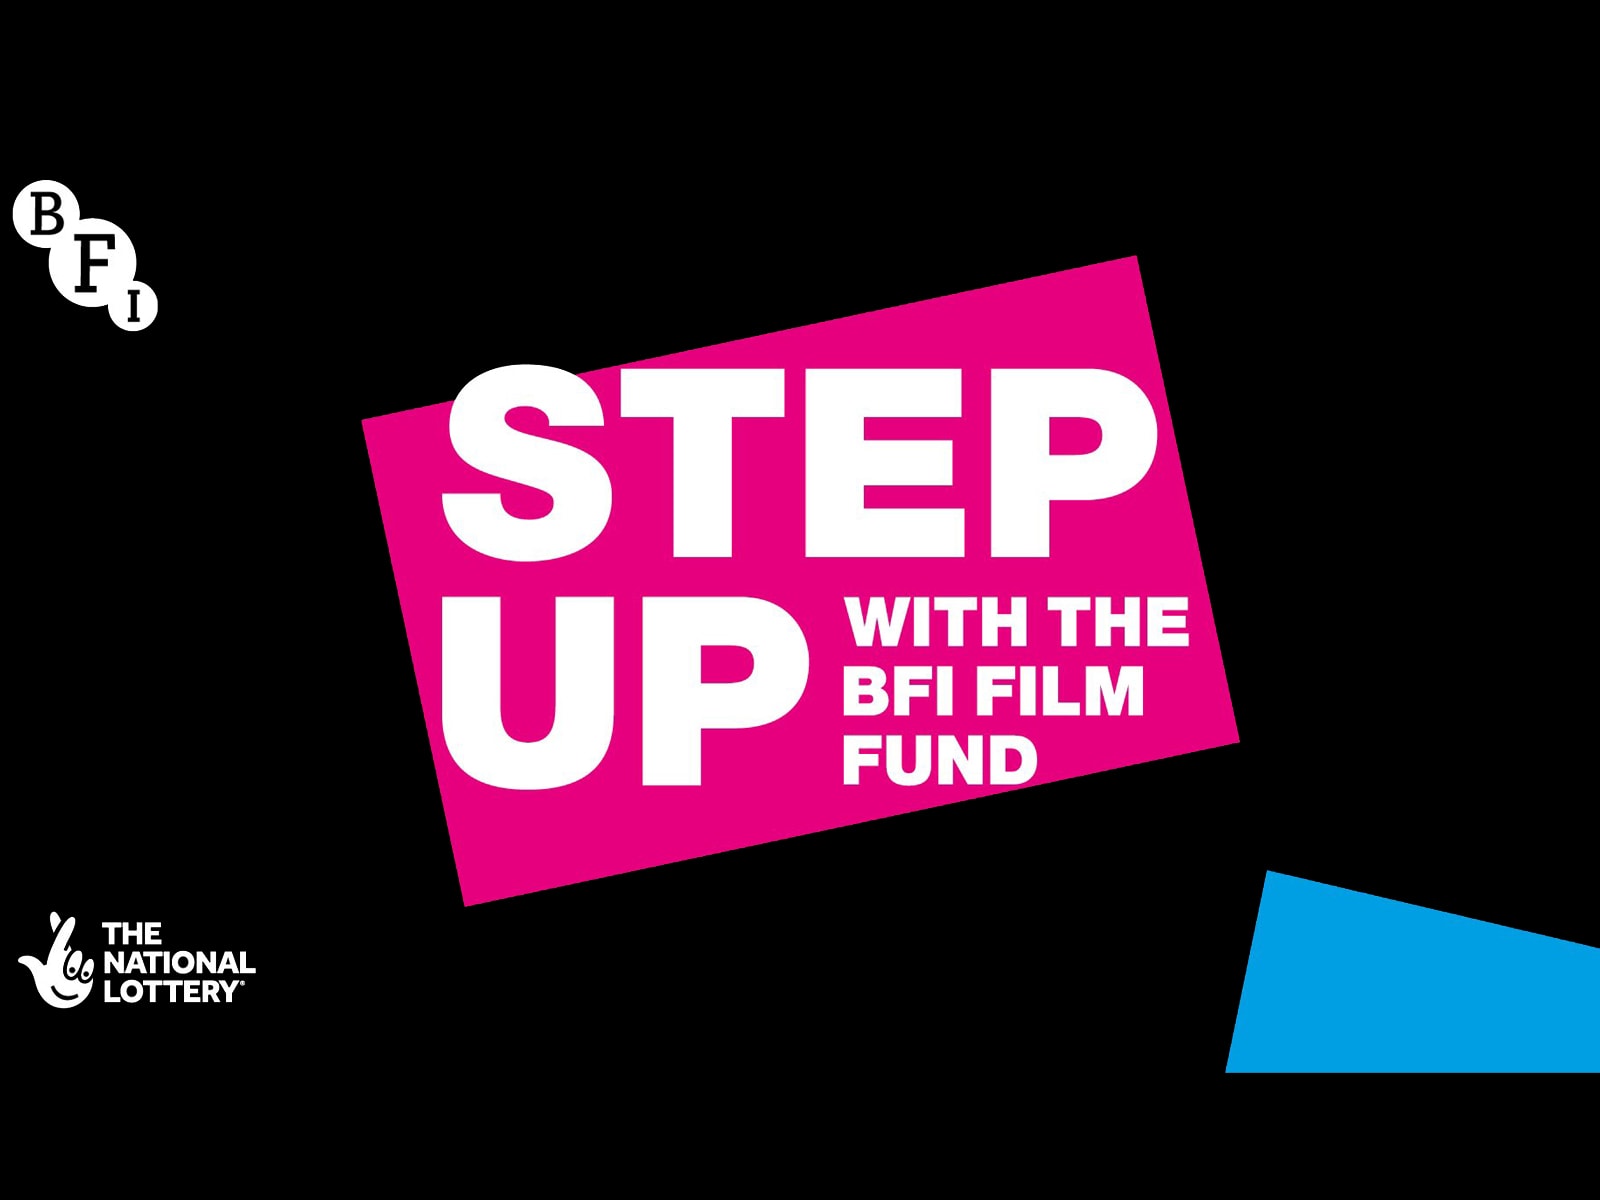 Bfi Film Fund S Step Up Is Now Open To Applications British Cinematographer